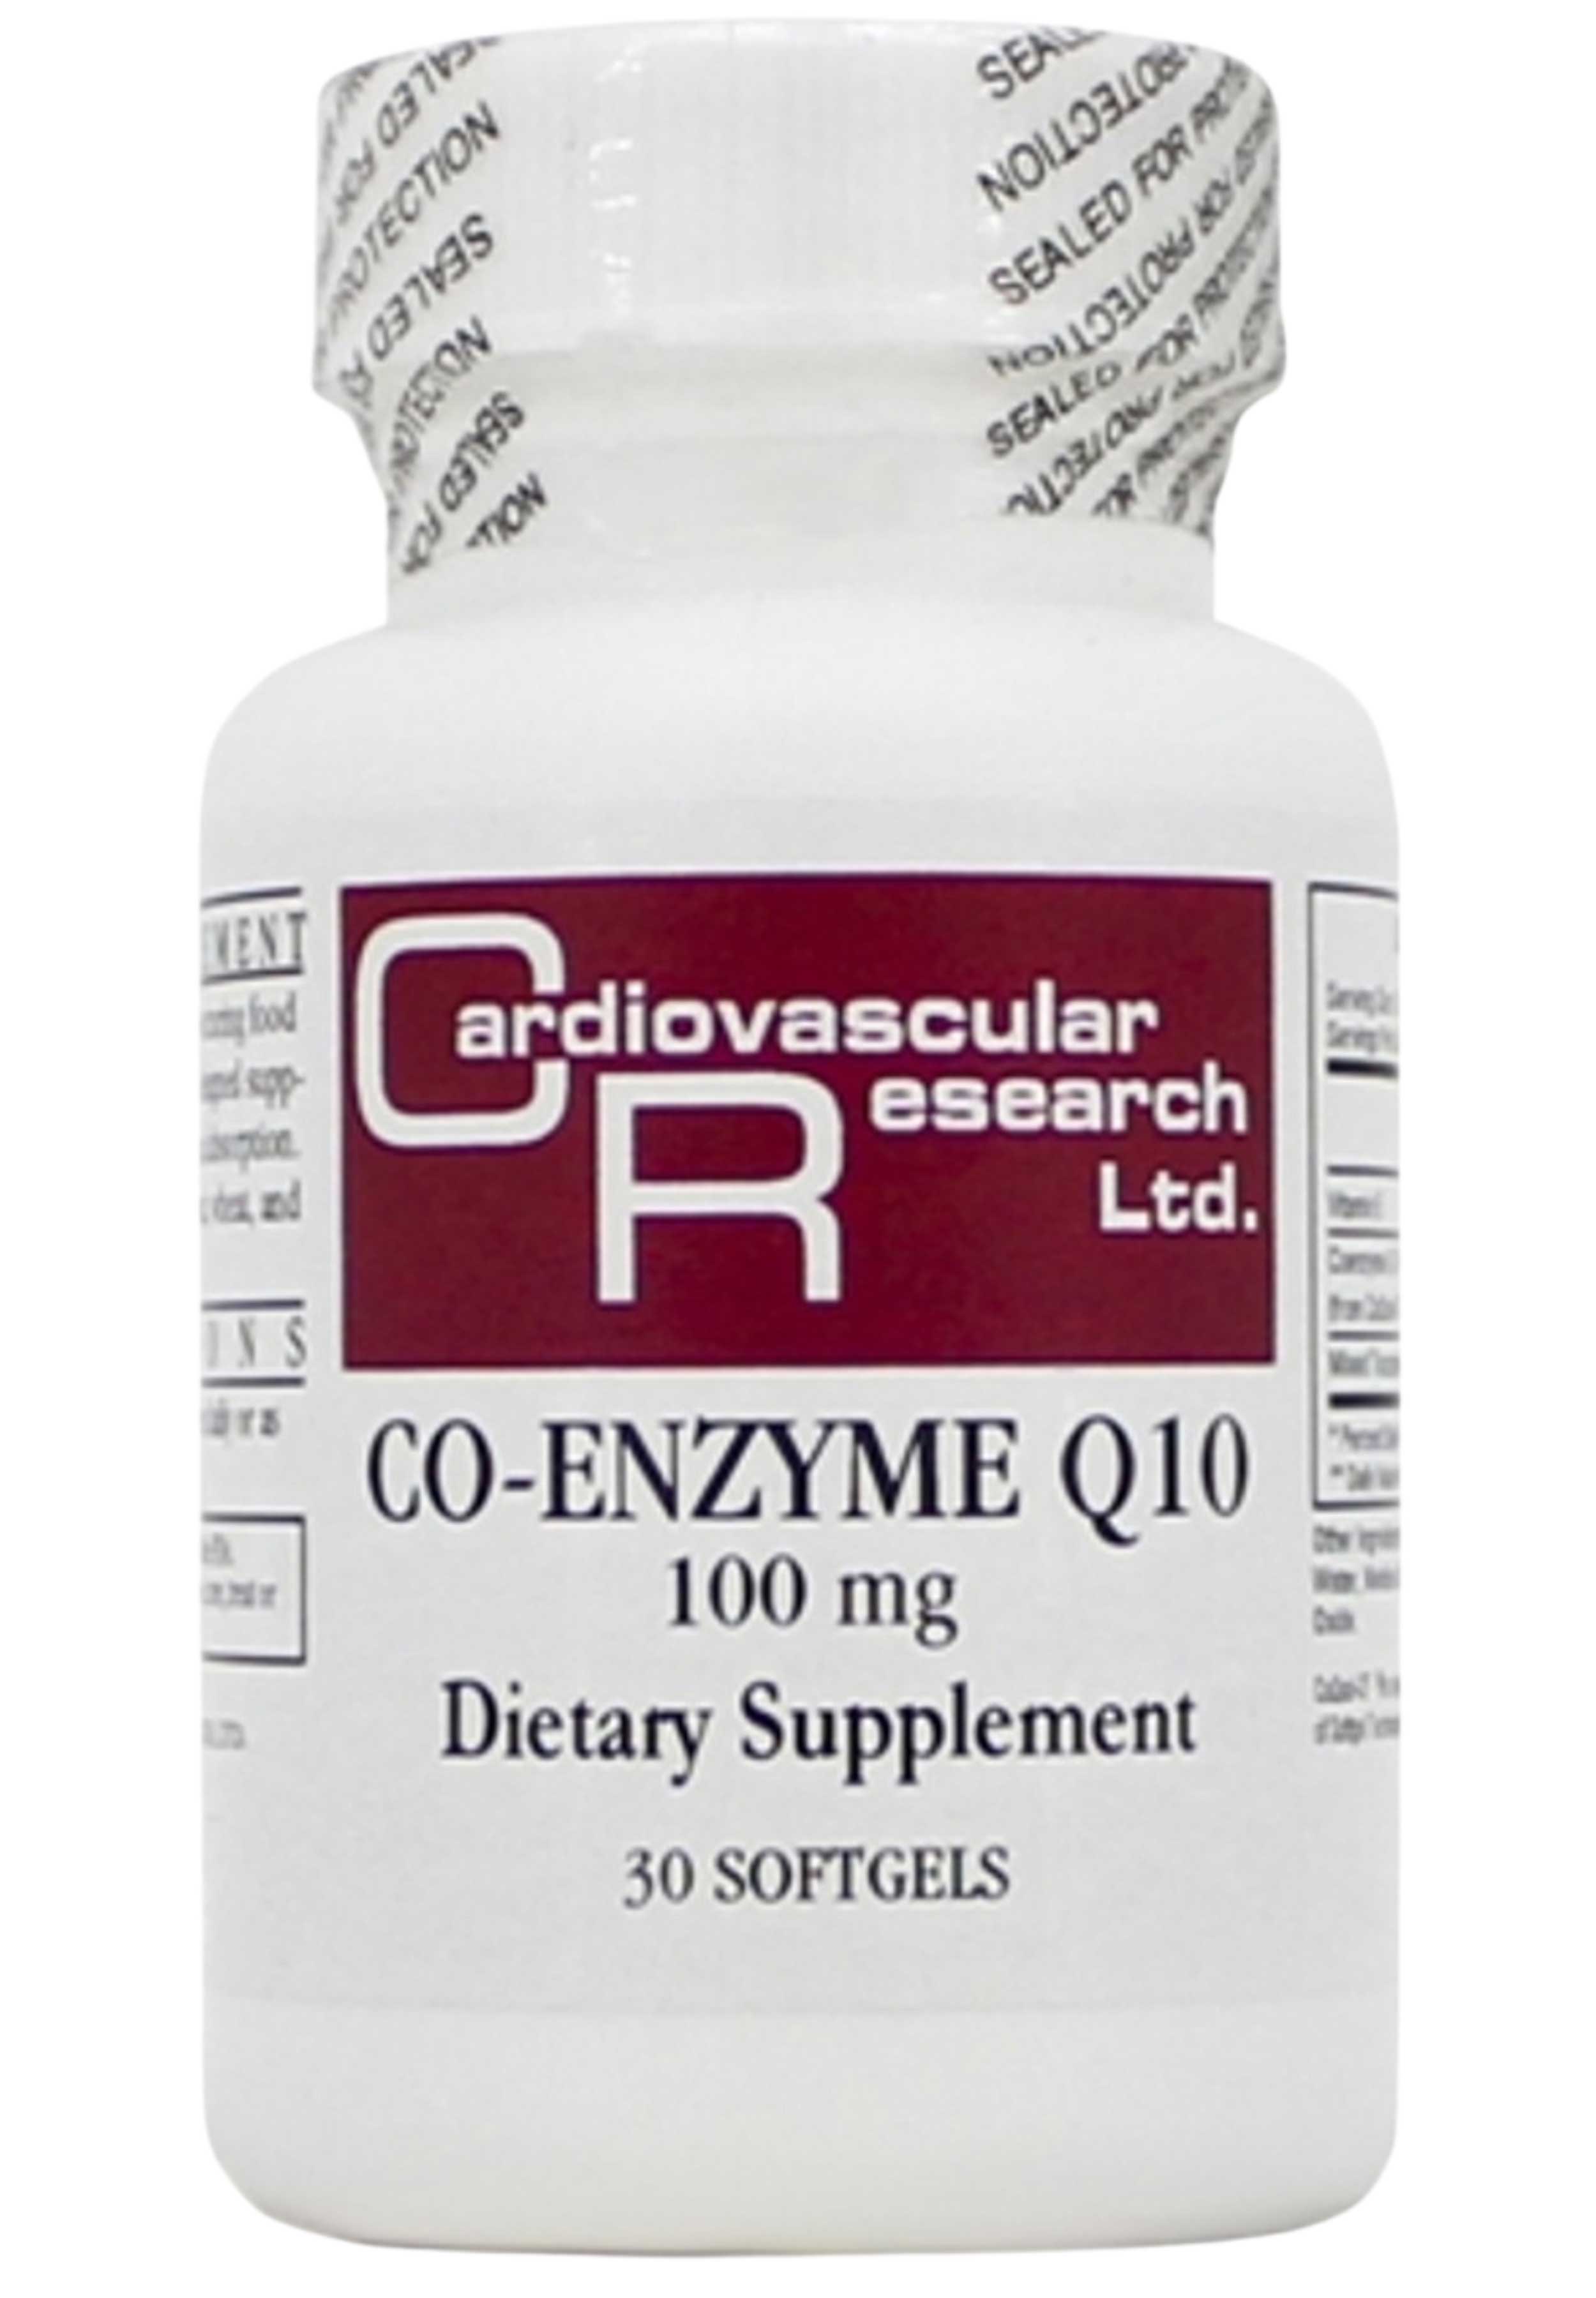 Ecological Formulas/Cardiovascular Research Co-Enzyme Q10 100 mg